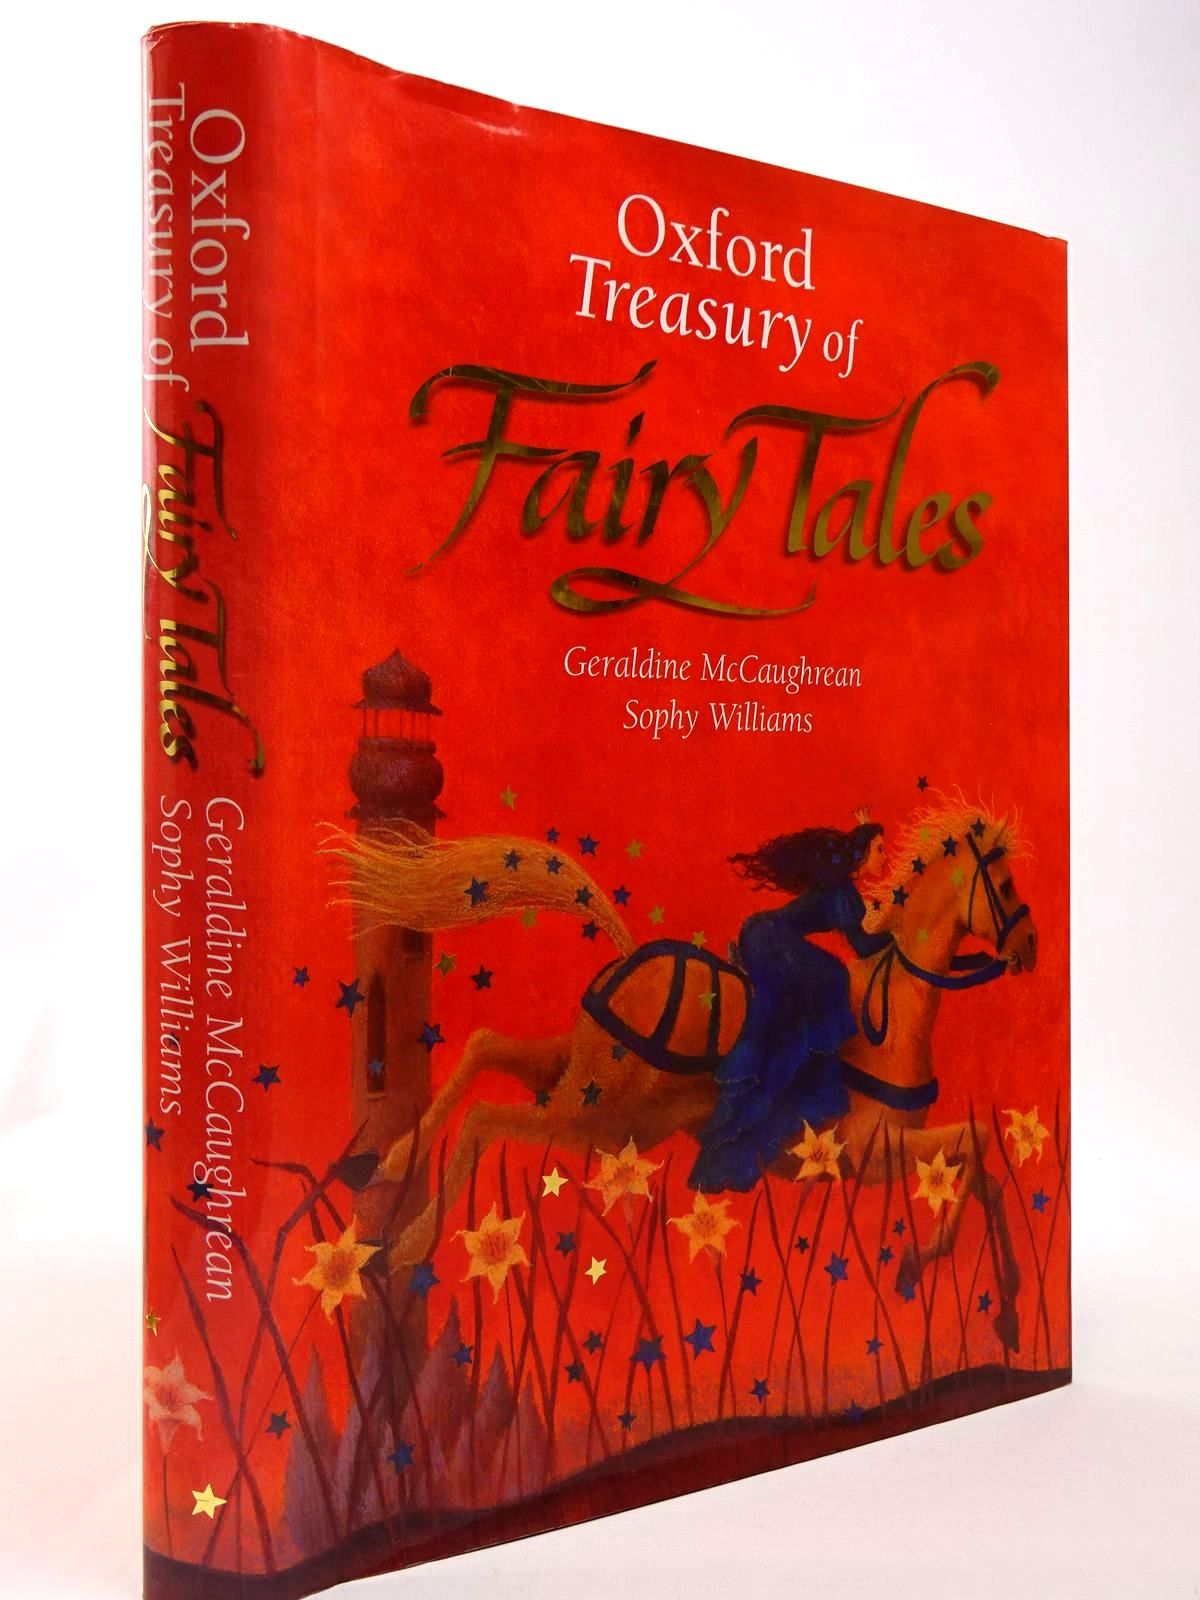 Photo of OXFORD TREASURY OF FAIRY TALES written by McCaughrean, Geraldine illustrated by Williams, Sophy published by Oxford University Press (STOCK CODE: 2129830)  for sale by Stella & Rose's Books